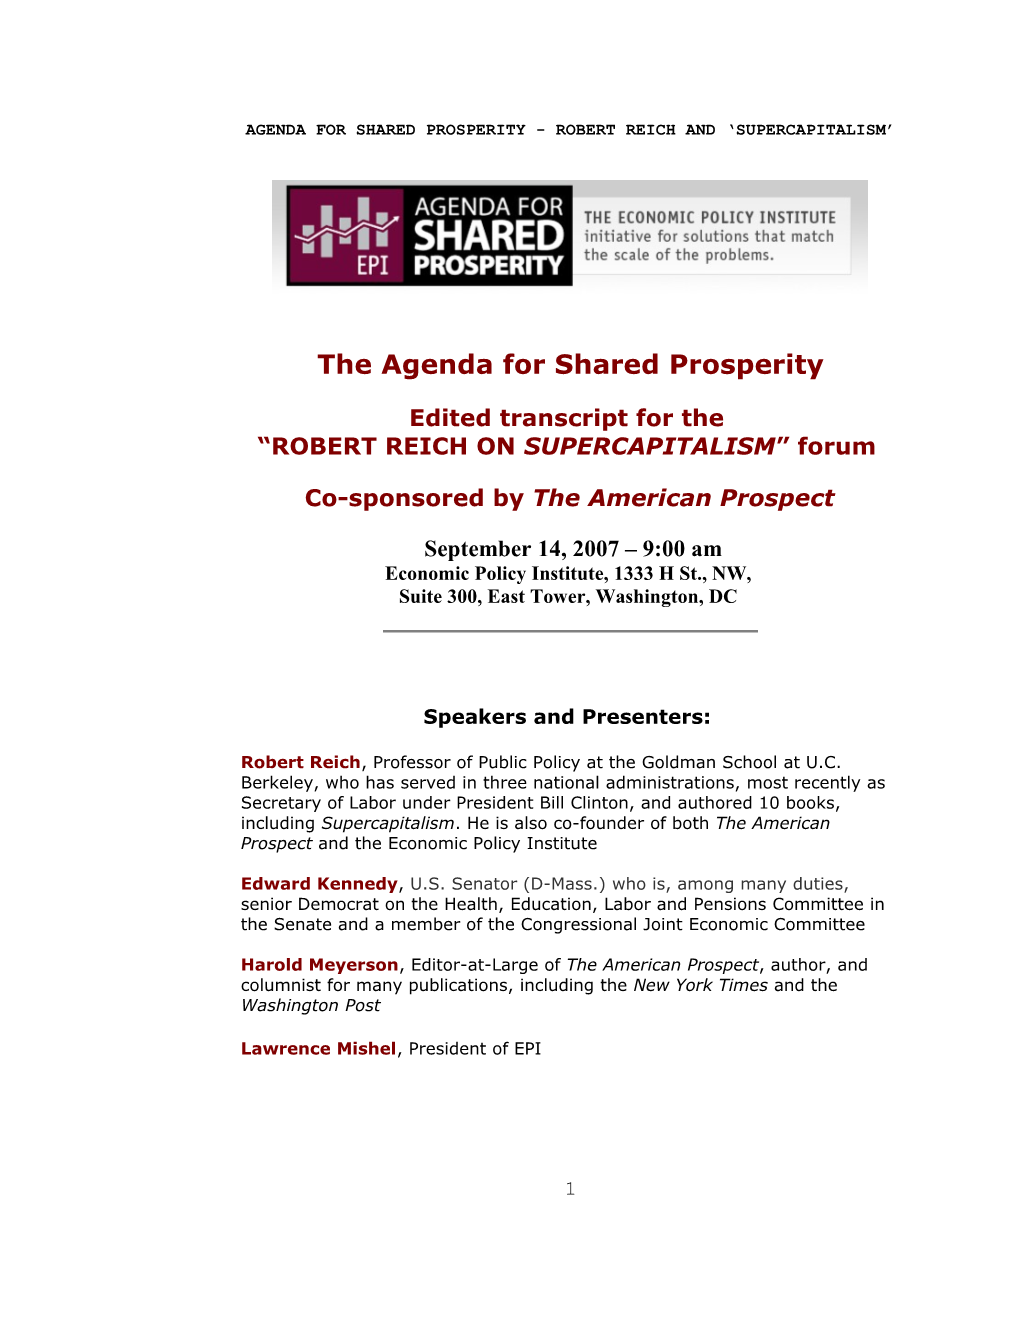 Agenda for Shared Prosperity - Robert Reich and Supercapitalism